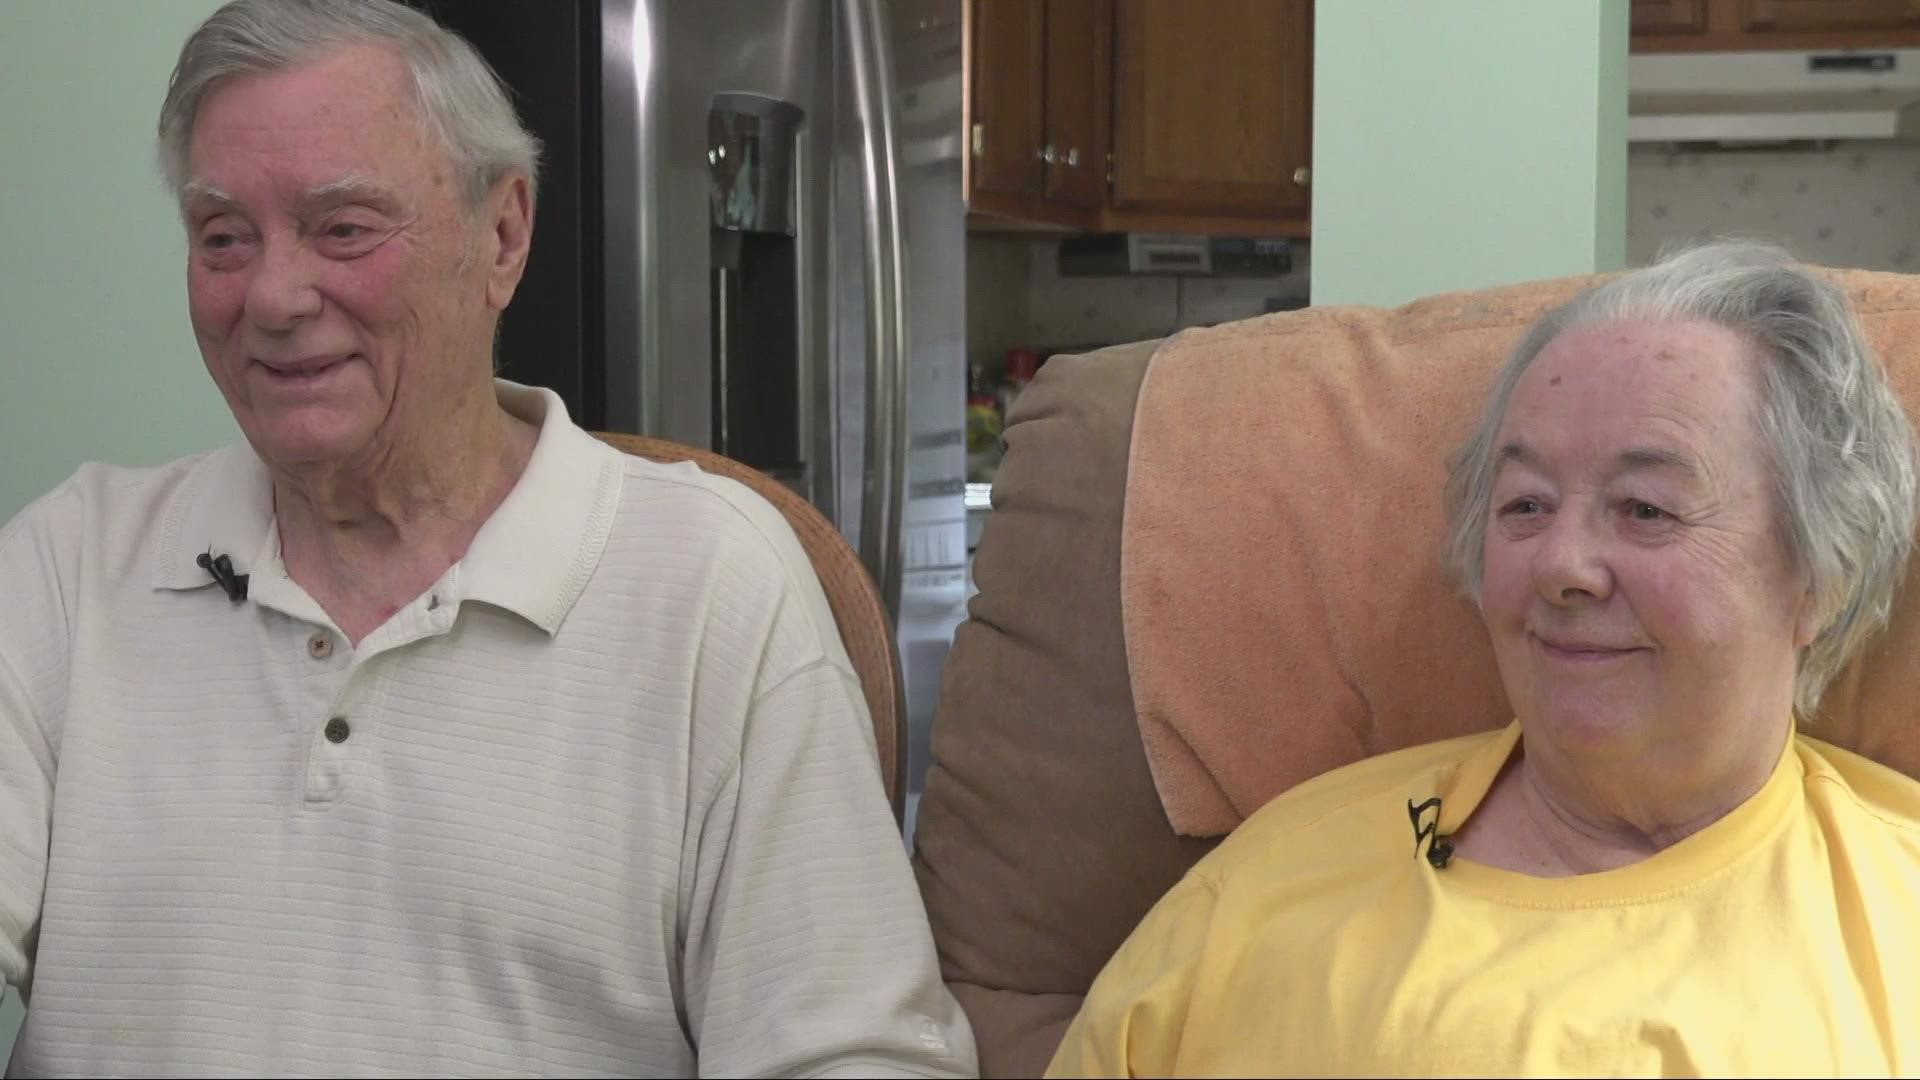 Dave and Pat Fink were married live on NBC way back in 1957, and remain deeply in love despite unforeseen challenges.